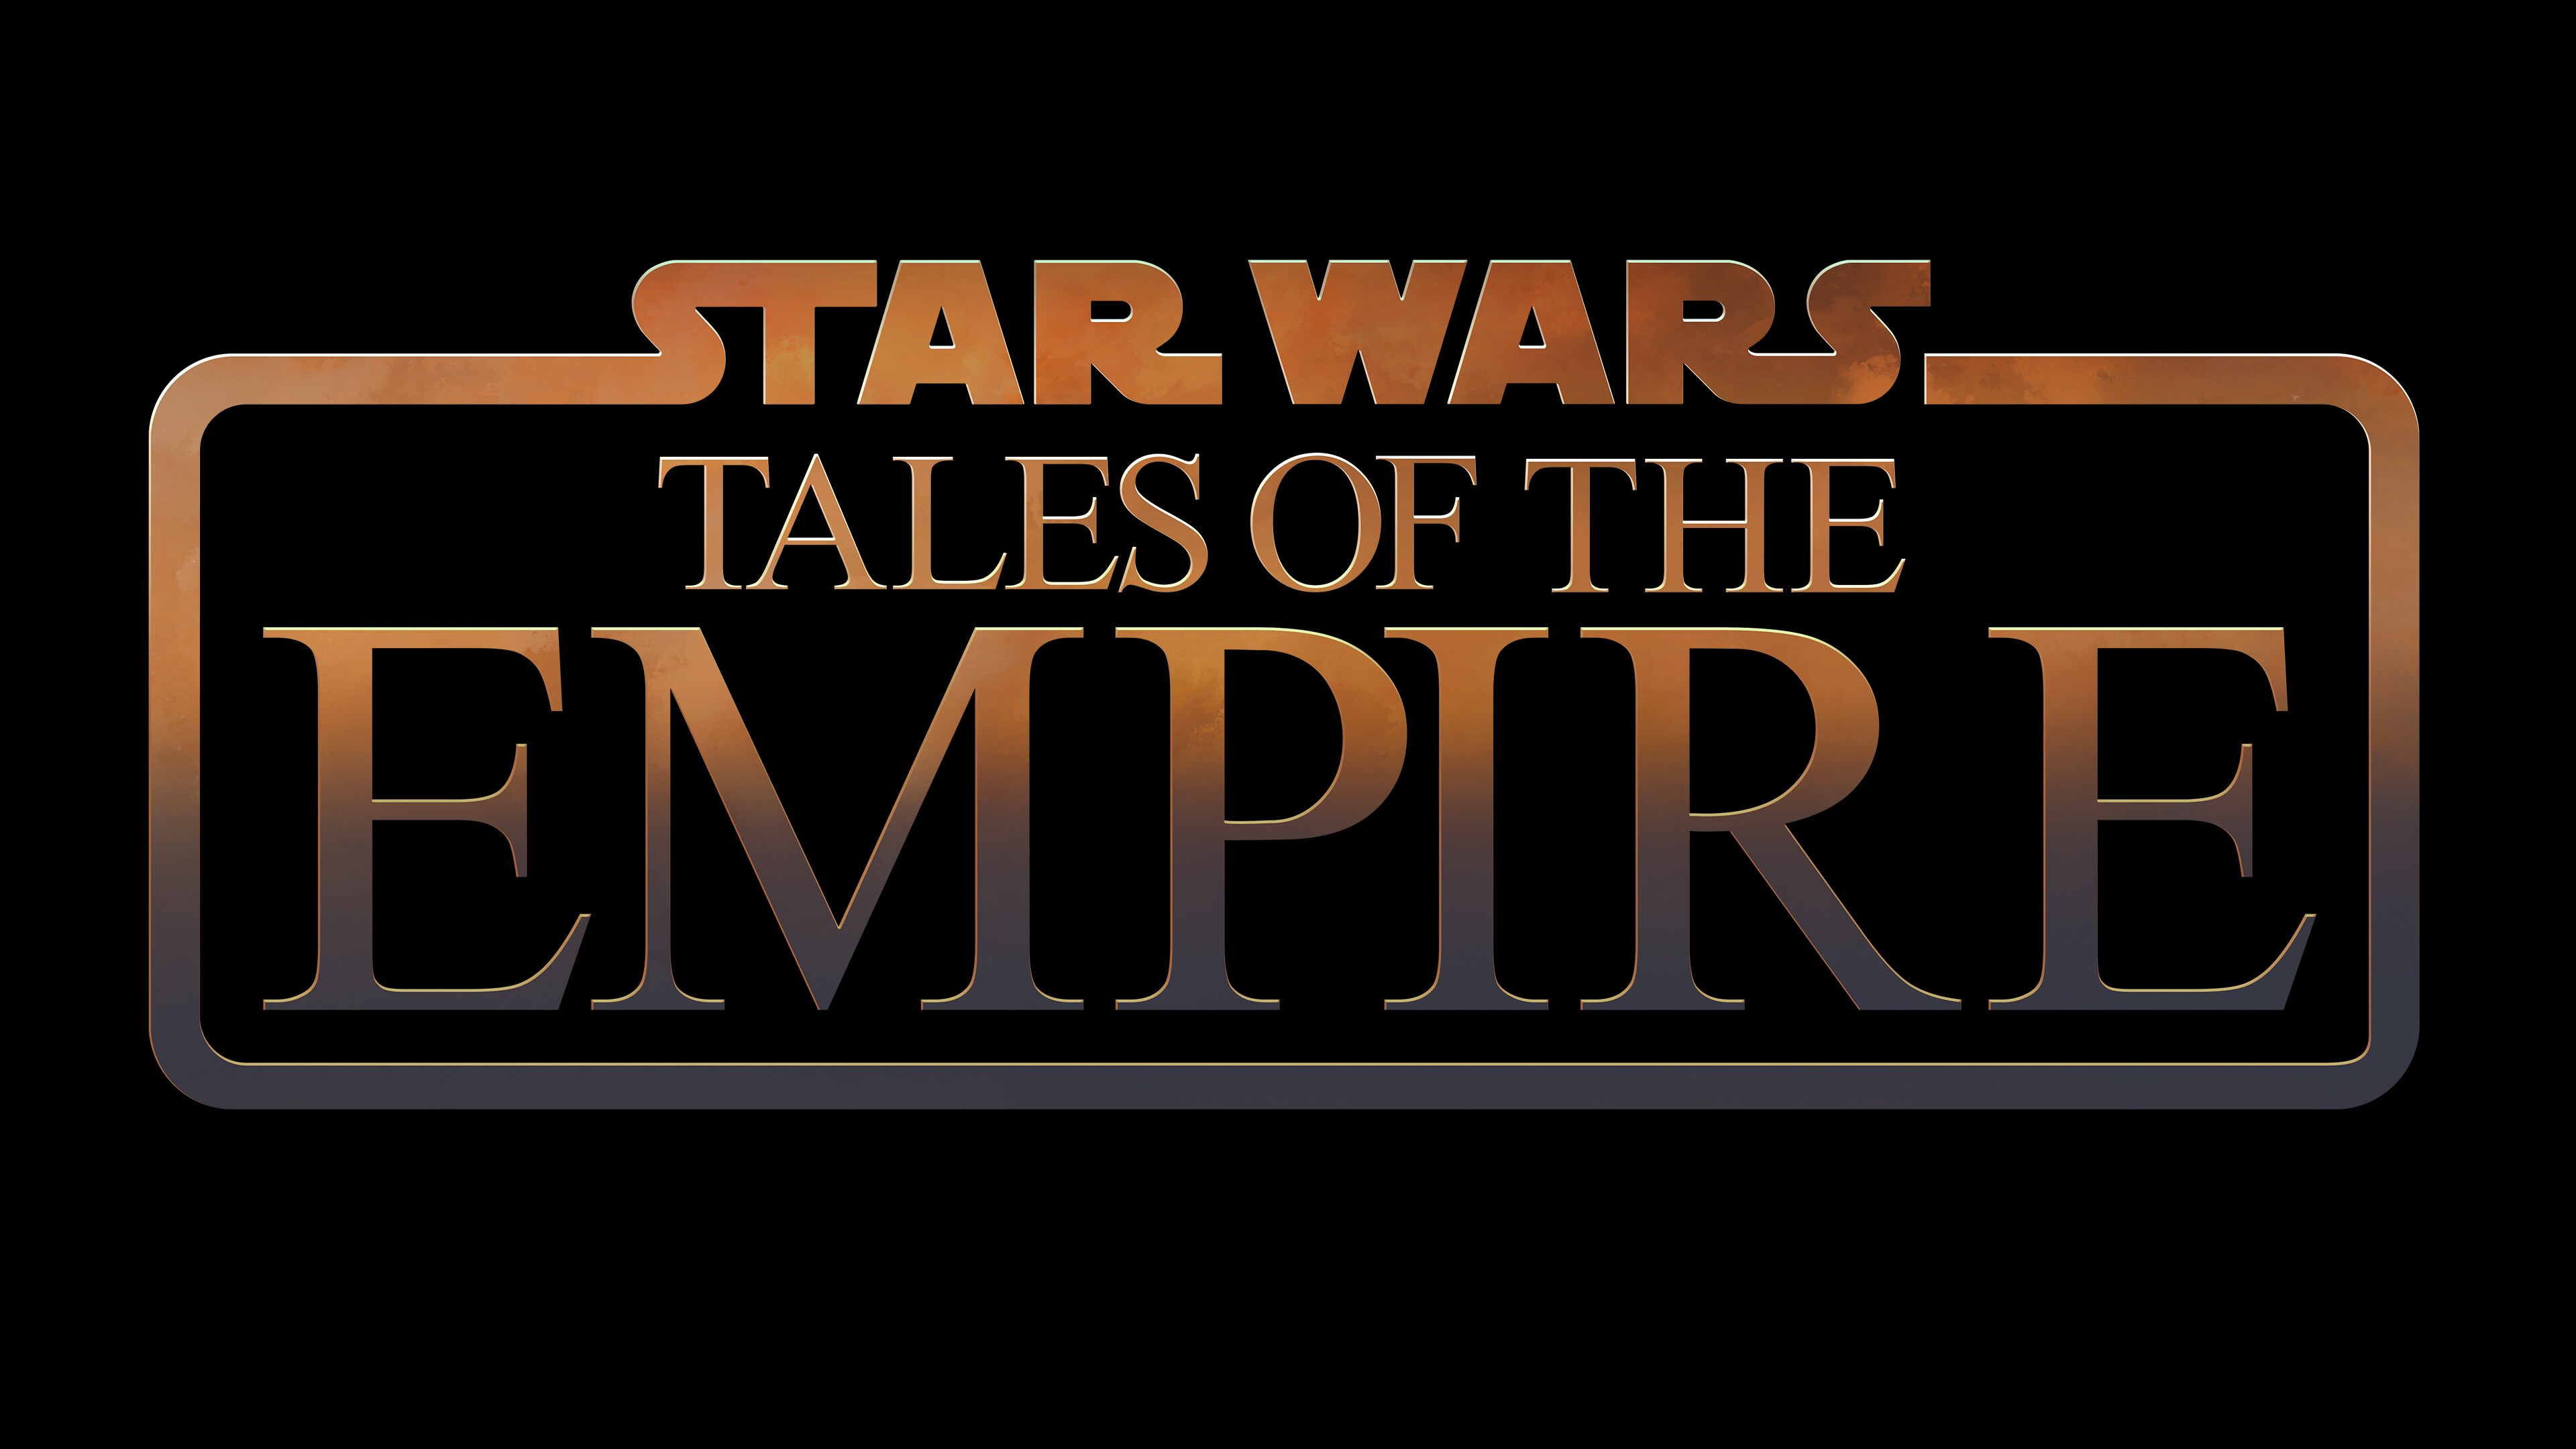 DISNEY+ UNVEILS TRAILER & KEY ART FOR “STAR WARS: TALES OF THE EMPIRE” 